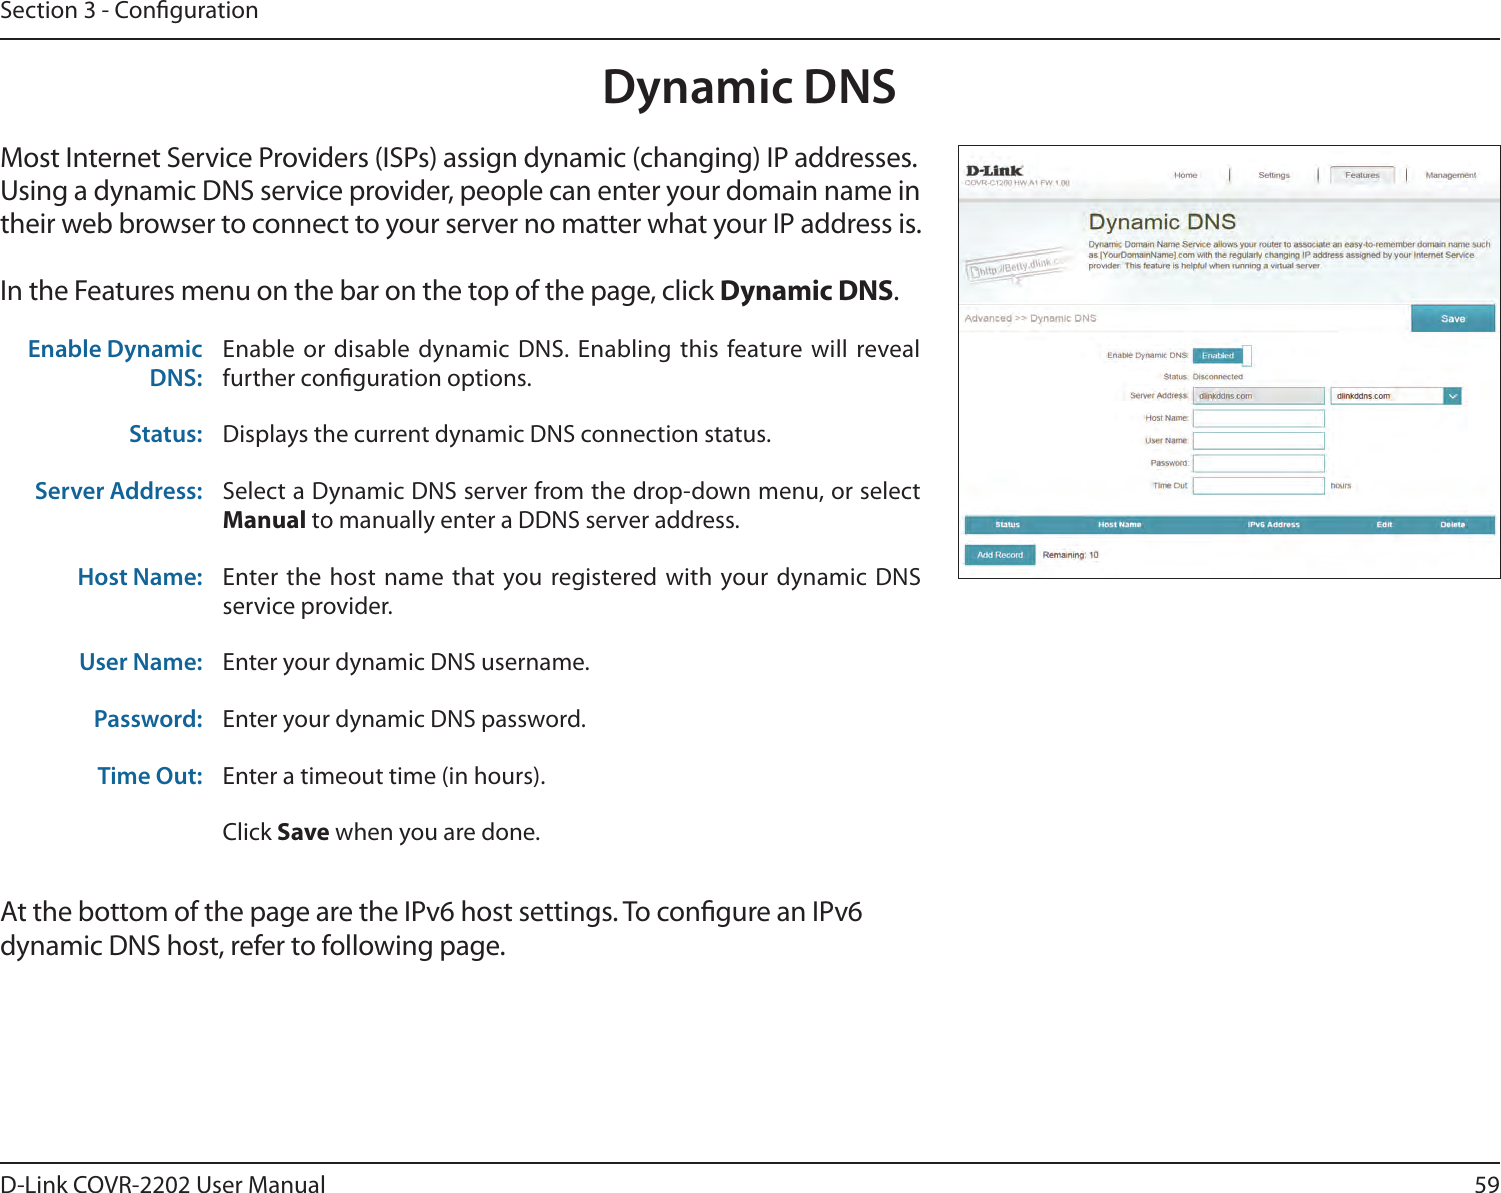 59D-Link COVR-2202 User ManualSection 3 - CongurationMost Internet Service Providers (ISPs) assign dynamic (changing) IP addresses. Using a dynamic DNS service provider, people can enter your domain name in their web browser to connect to your server no matter what your IP address is.In the Features menu on the bar on the top of the page, click Dynamic DNS.Enable Dynamic DNS:Enable or disable dynamic DNS. Enabling this feature will reveal further conguration options.Status: Displays the current dynamic DNS connection status.Server Address: Select a Dynamic DNS server from the drop-down menu, or select  to manually enter a DDNS server address.Host Name: Enter the host name that you registered with your dynamic DNS service provider.User Name: Enter your dynamic DNS username.Password: Enter your dynamic DNS password.Time Out: Enter a timeout time (in hours).Click Save when you are done.Dynamic DNSAt the bottom of the page are the IPv6 host settings. To congure an IPv6 dynamic DNS host, refer to following page.